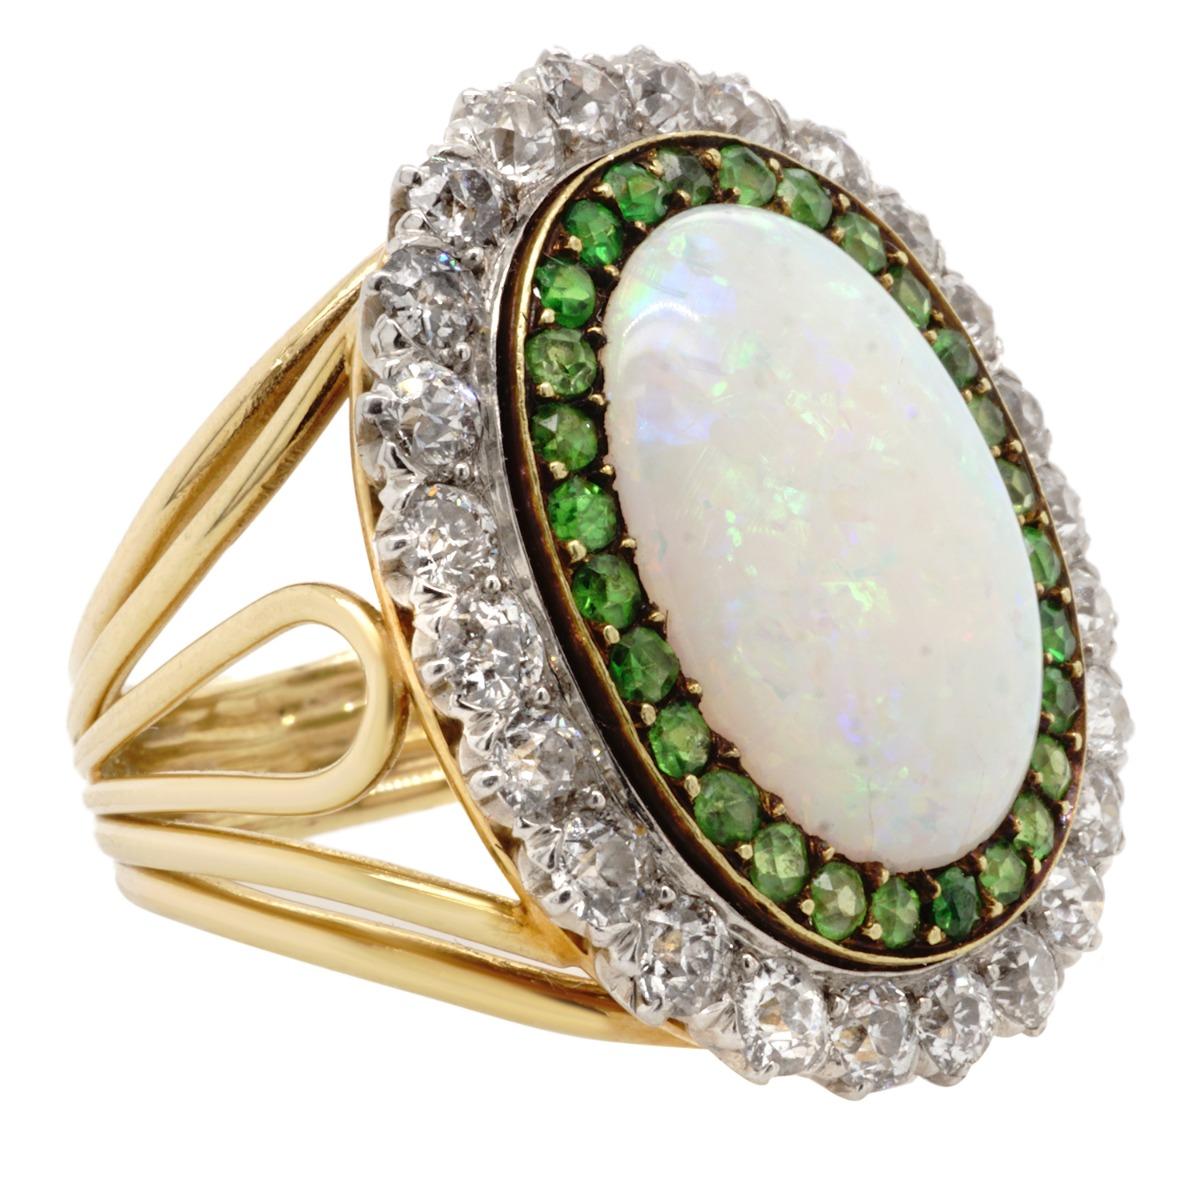 Crafted in 18 karat gold this ring features an oval opal 15.8 x 11.6 mm surrounded by old mine cut diamonds and demantoid garnets.  Weighs 13.0 gr./8.4 dwt.  Ring size 7.

Diamonds:  Estimated weight 2.00 carats
Demantoid:  Weight estimated 1.00